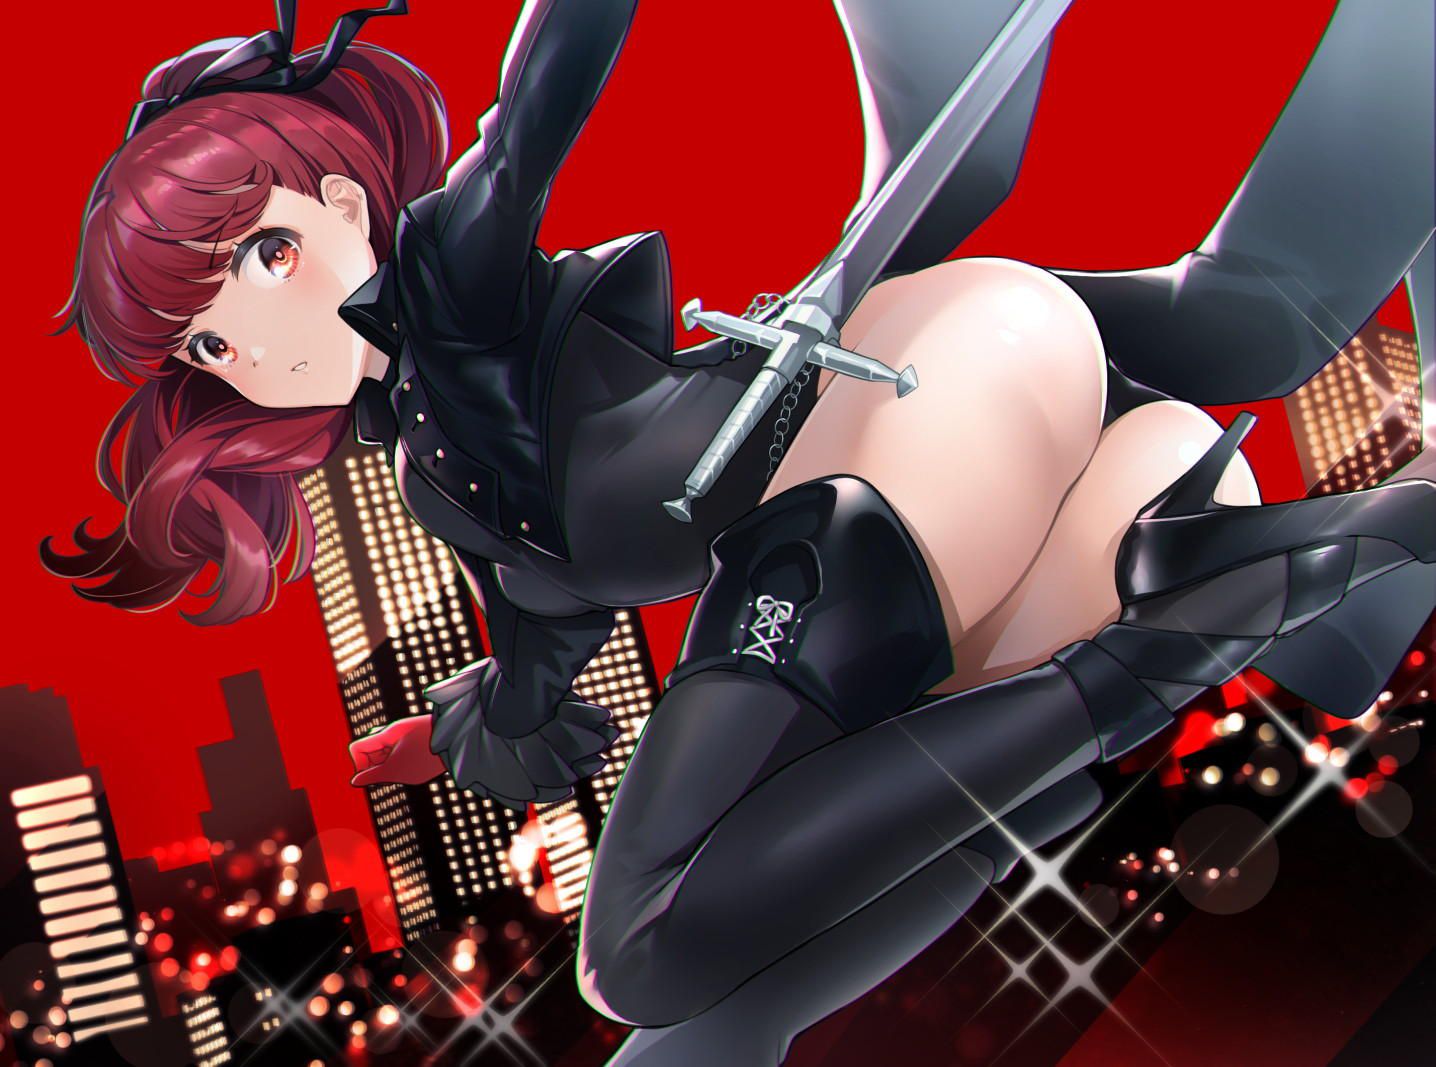 Secondary fetish image of persona. 18